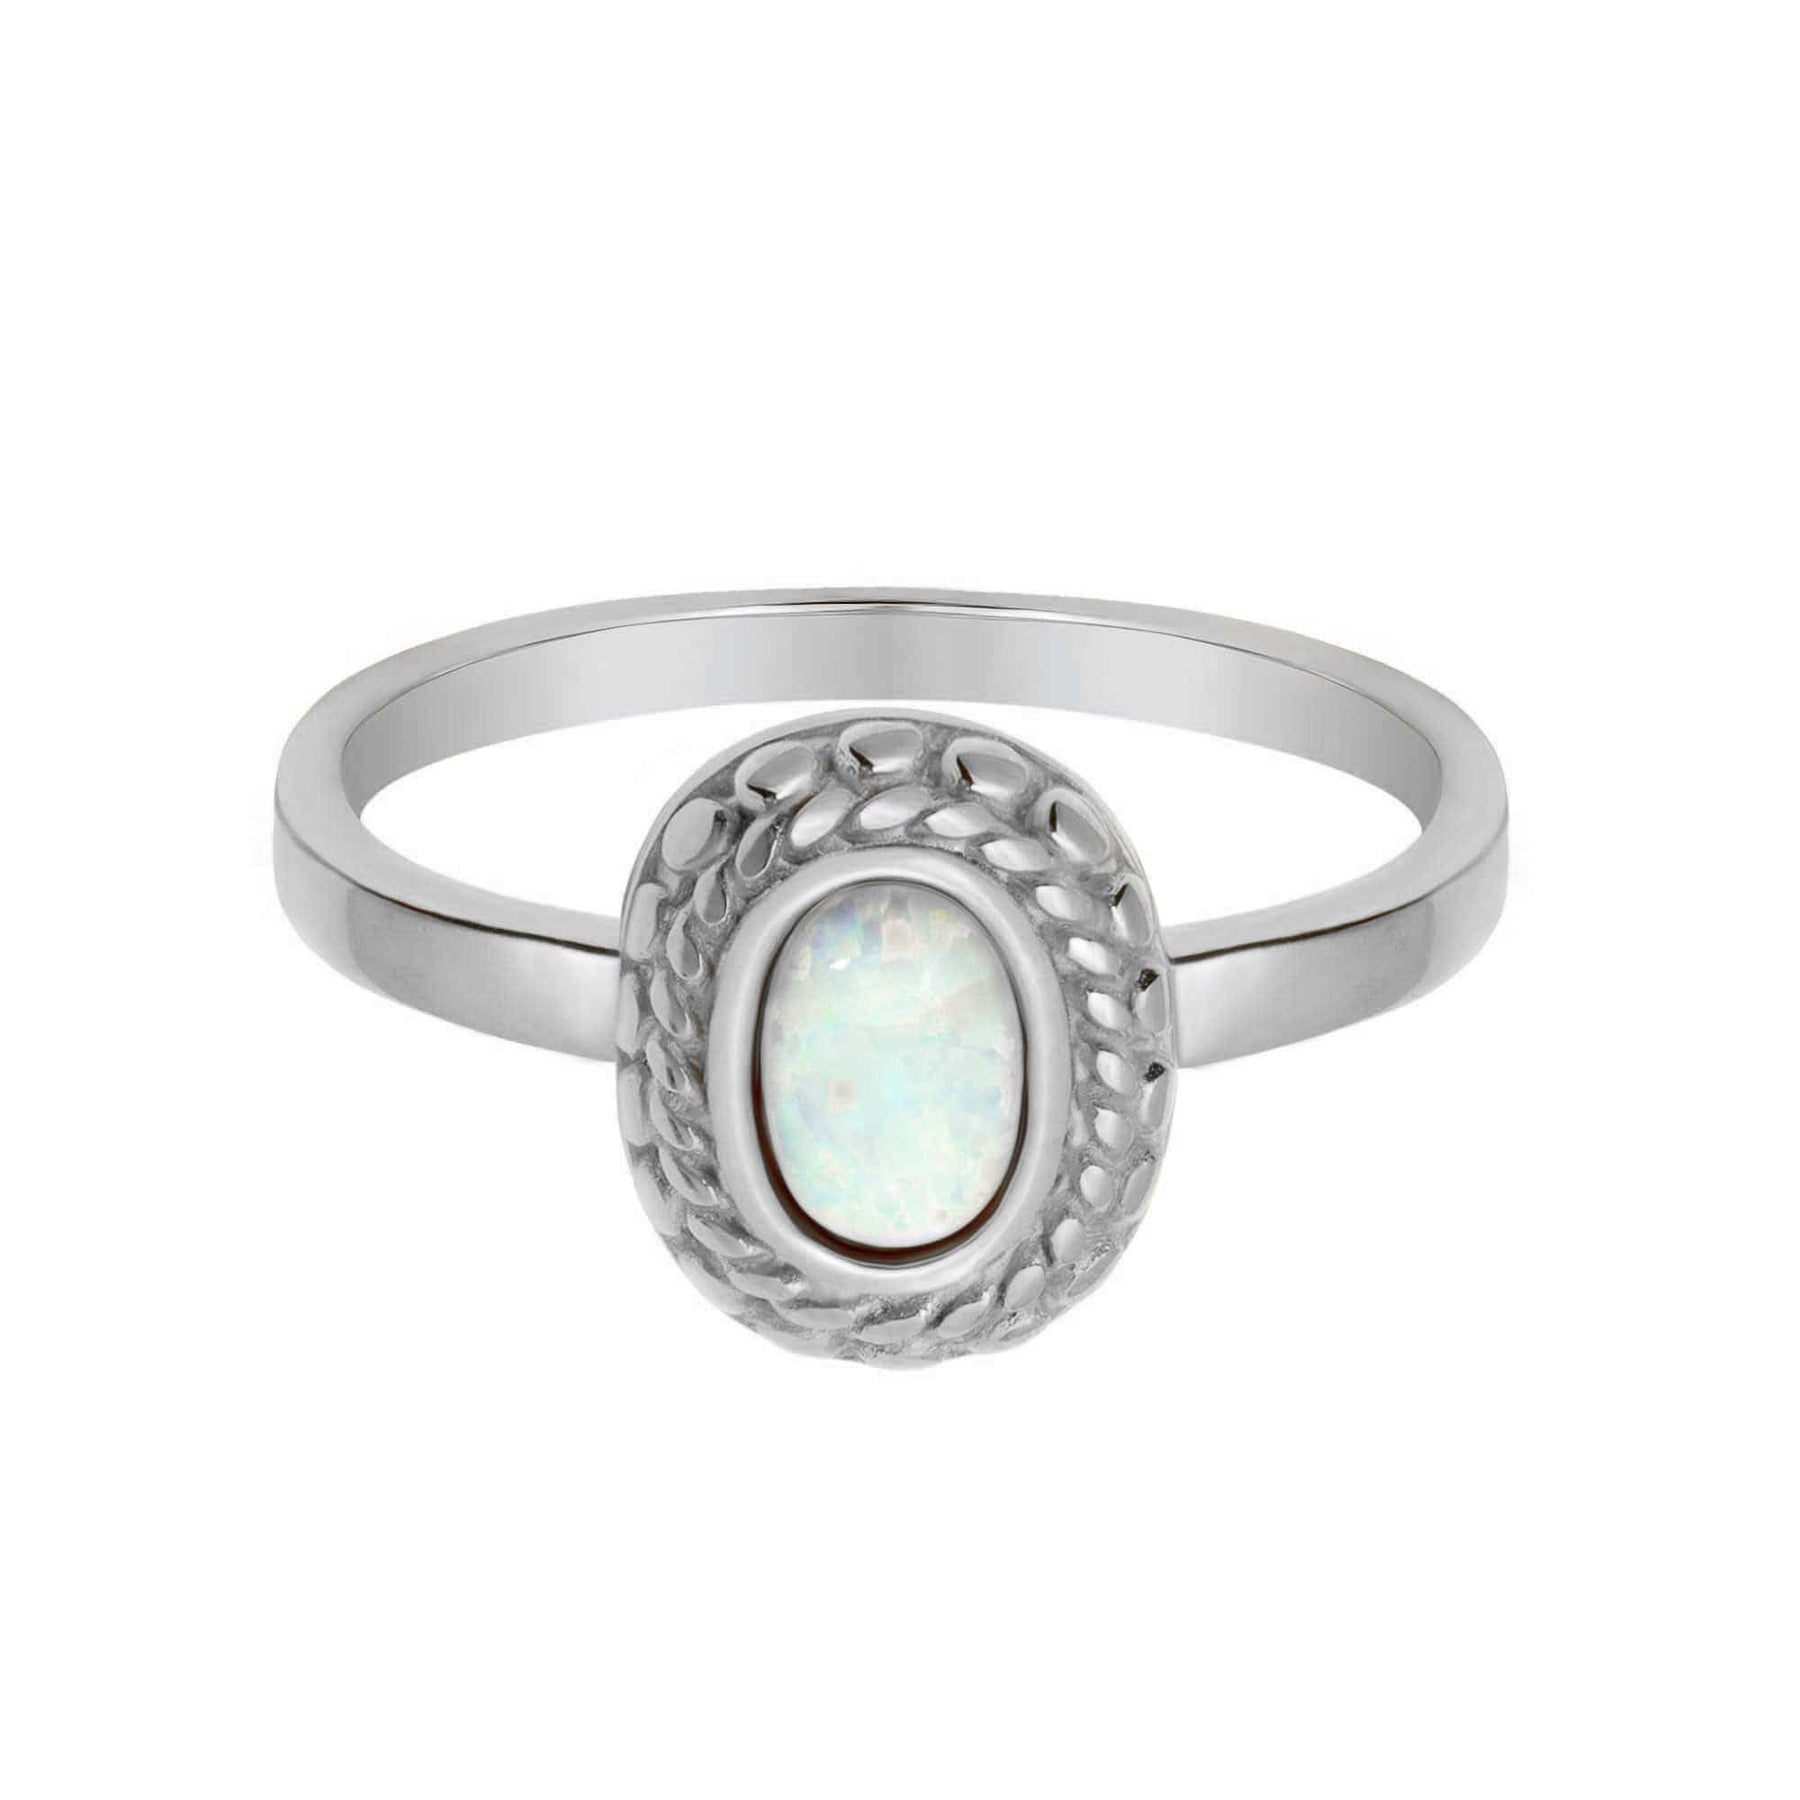 BohoMoon Stainless Steel Perrie Opal Ring Silver / US 6 / UK L / EUR 51 (small)